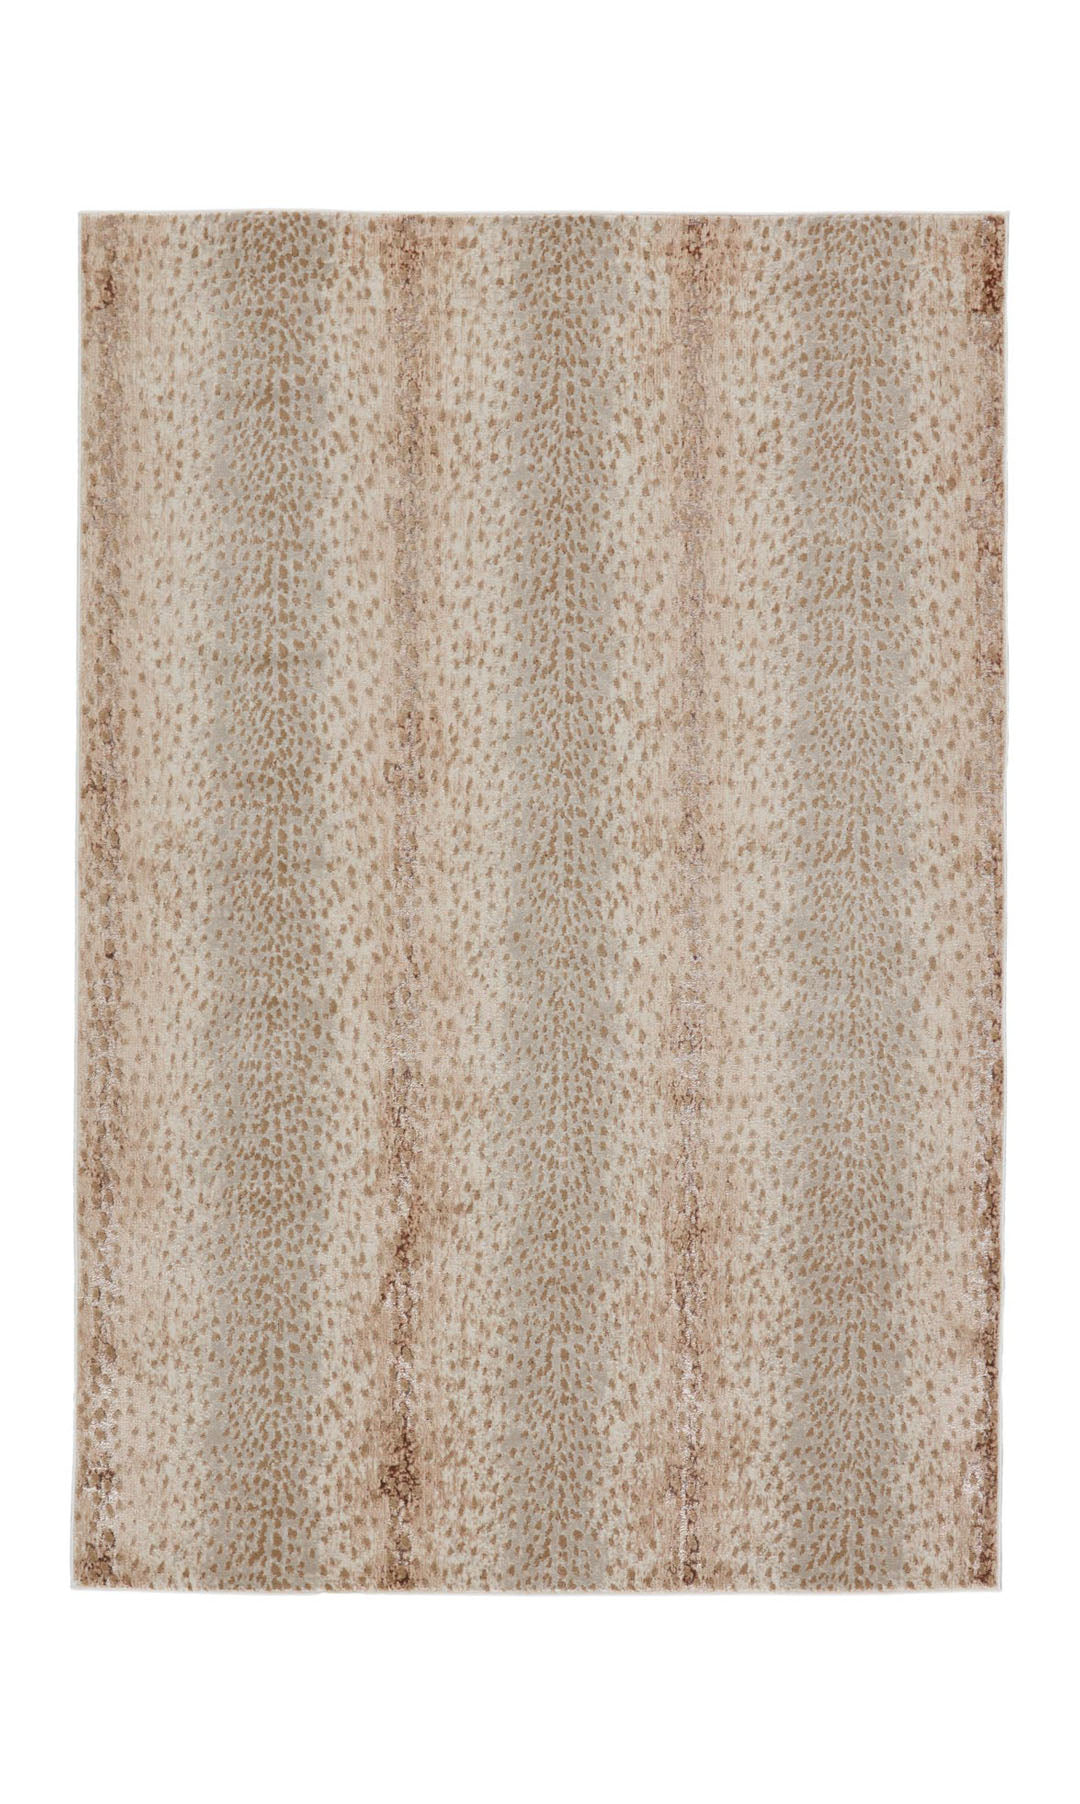 Catalyst Axis Rug | Jaipur Living | Rugs | catalyst-axis-rug-cty13